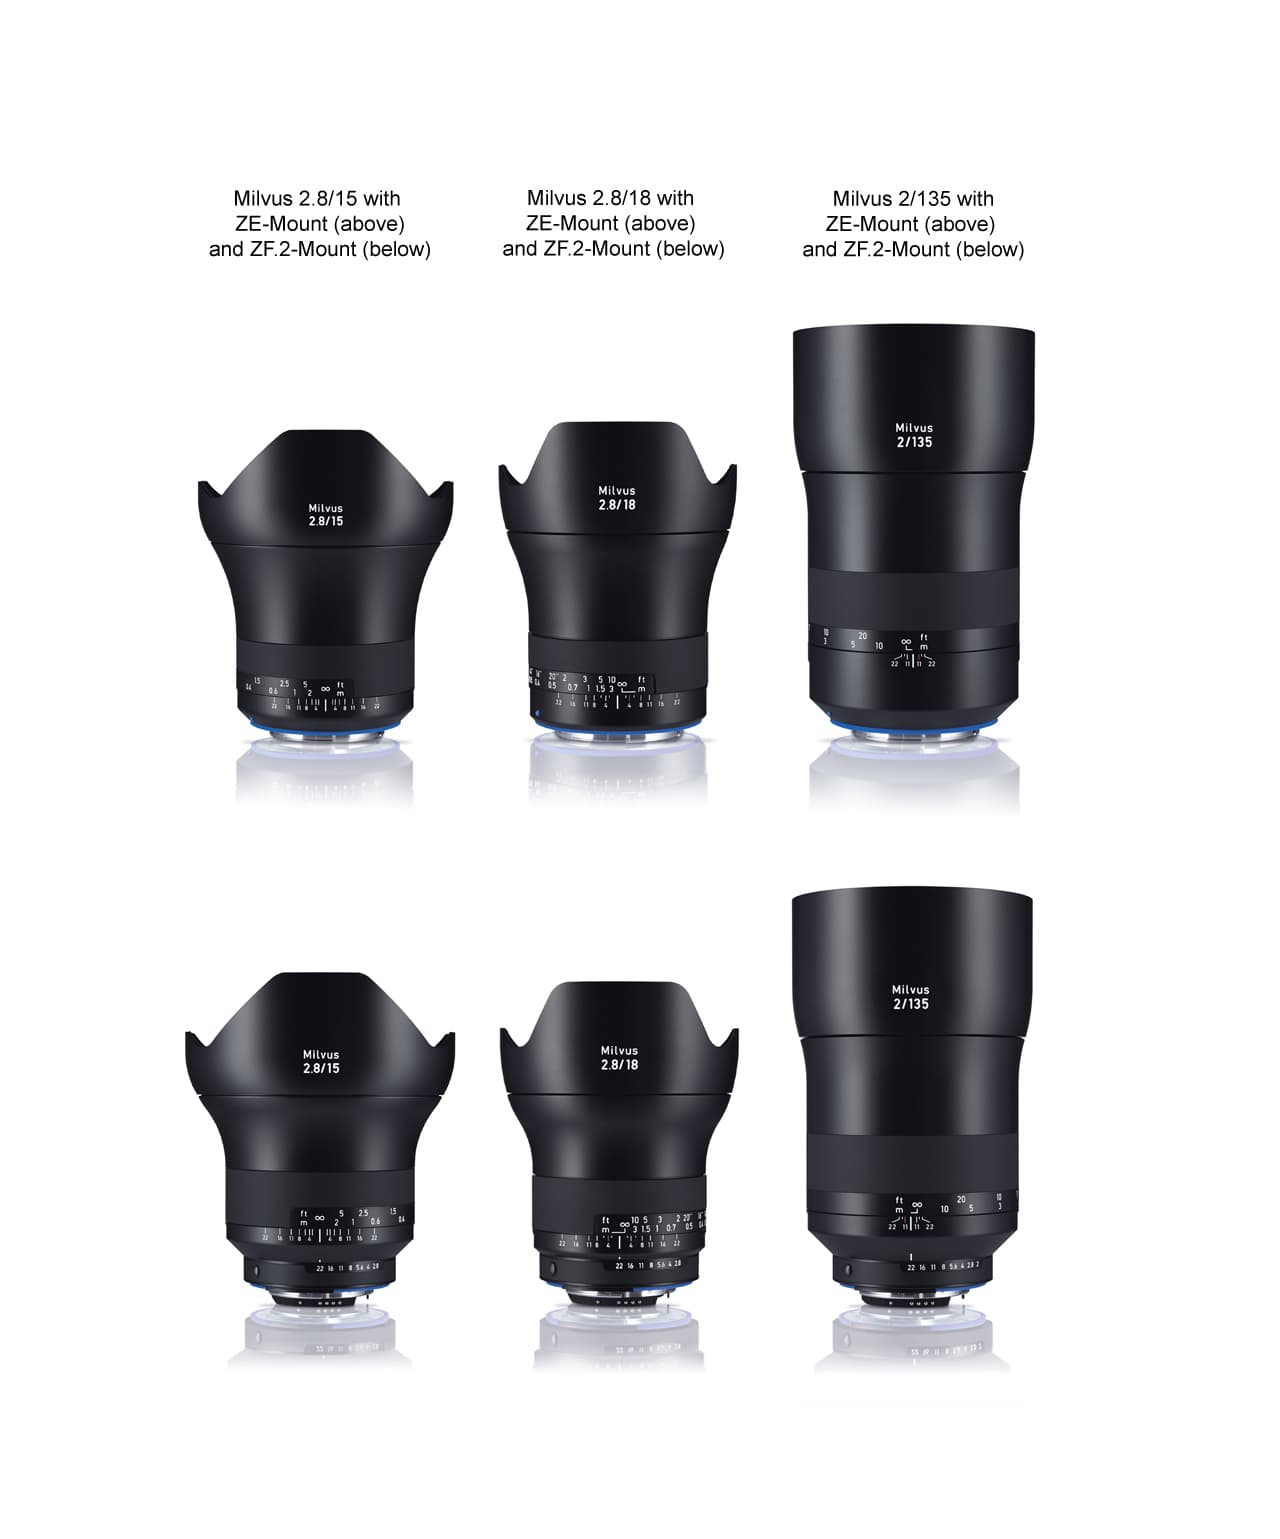 The focal lengths 15mm, 18mm and 135mm are each being offered as a ZF.2 mount for Nikon and as a ZE mount for Canon cameras. In addition, the ZF.2 version is equipped with a manual aperture ring.